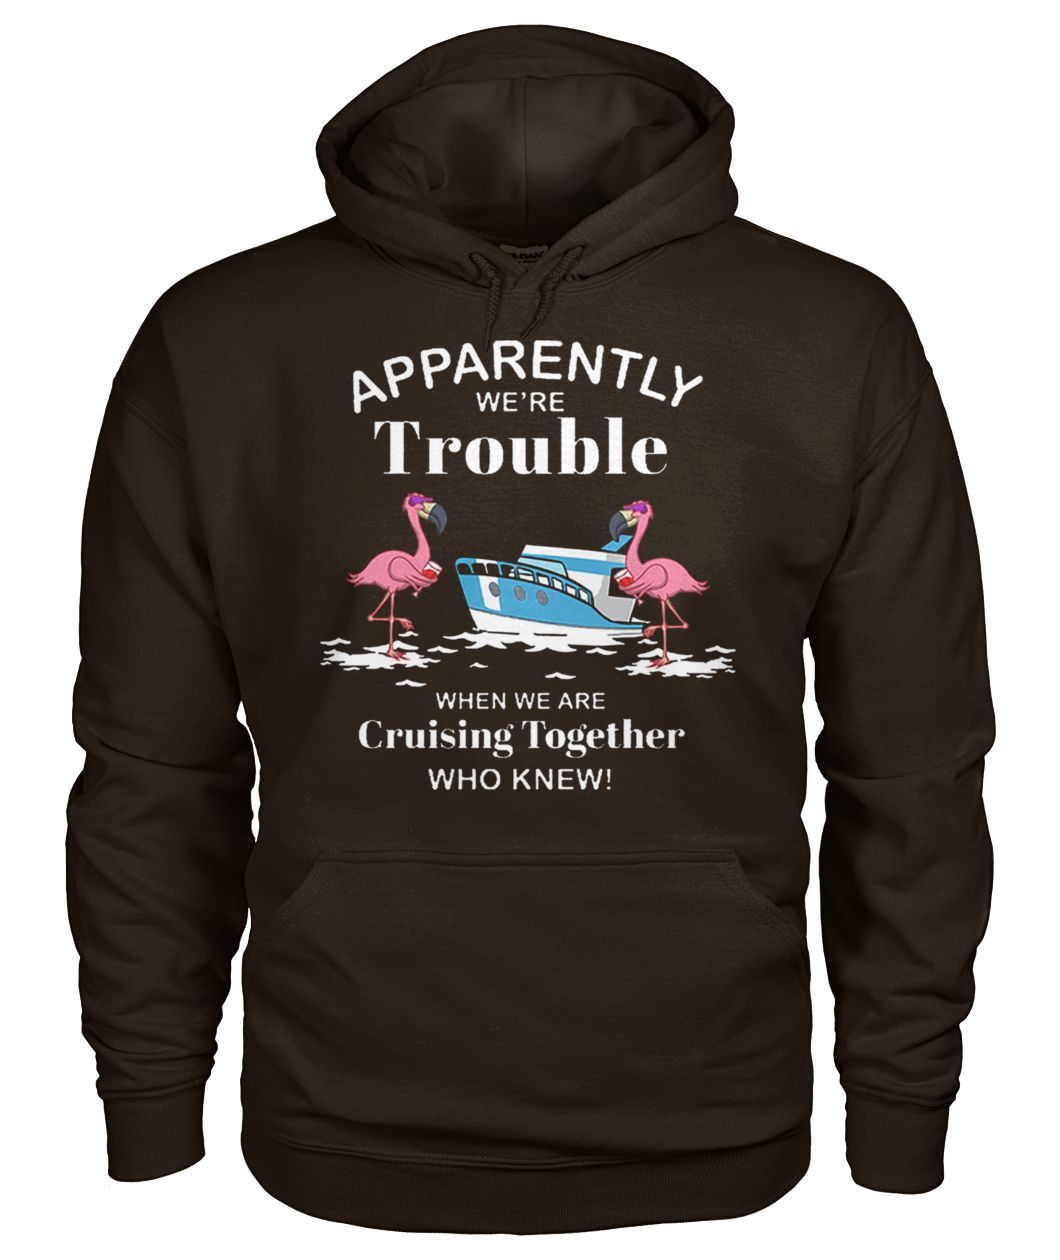 Apparently we're trouble when we are cruising together who knew flamingo gildan hoodie